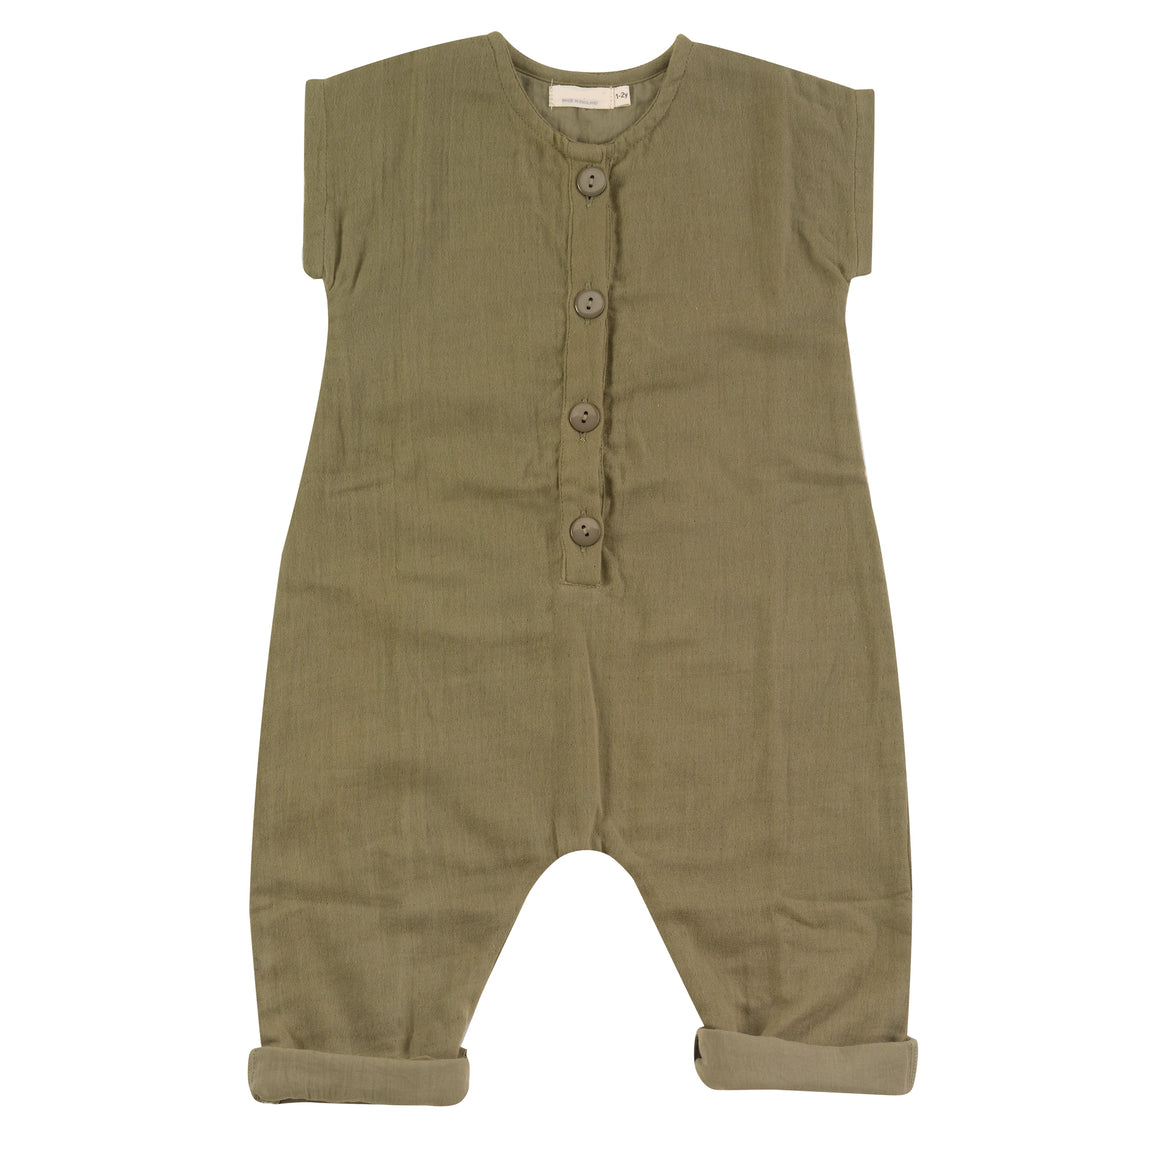 Muslin jumpsuit in olive